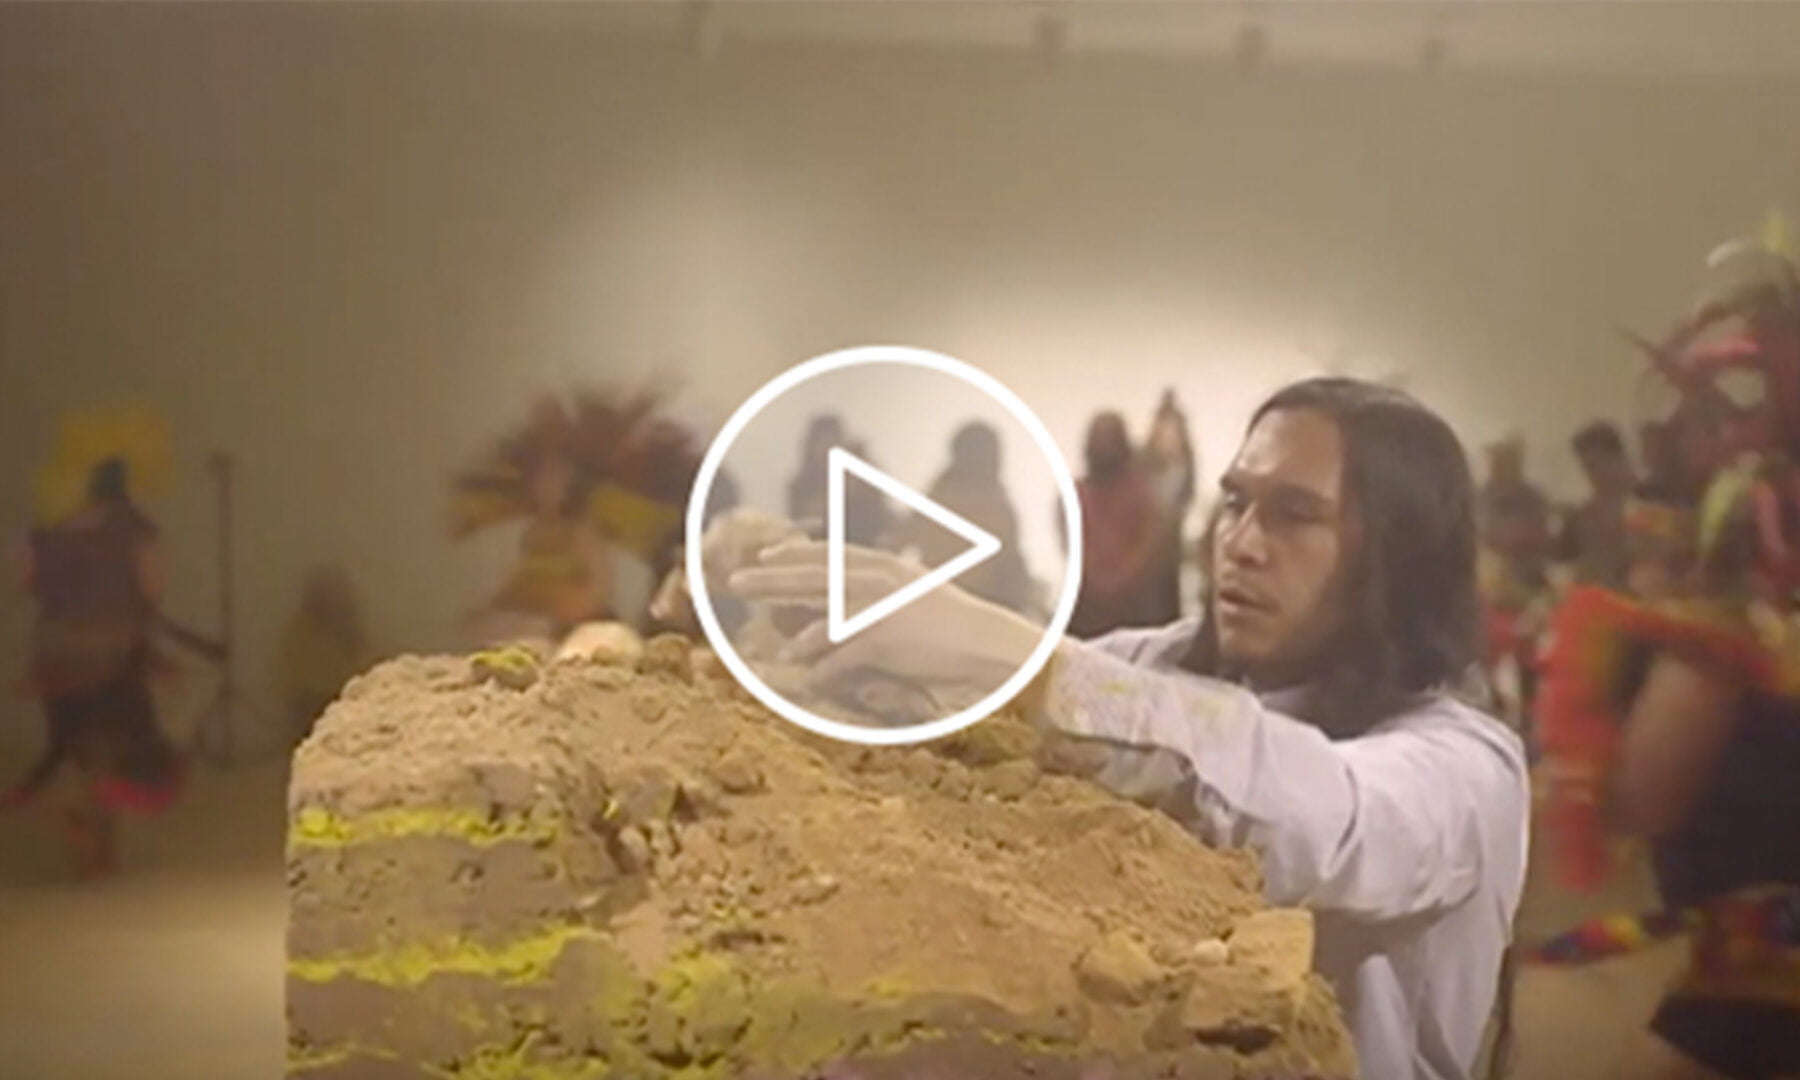 [VIDEO] Armando Guadalupe Cortes–Performance at the ASU Art Museum for “Total Collapse”